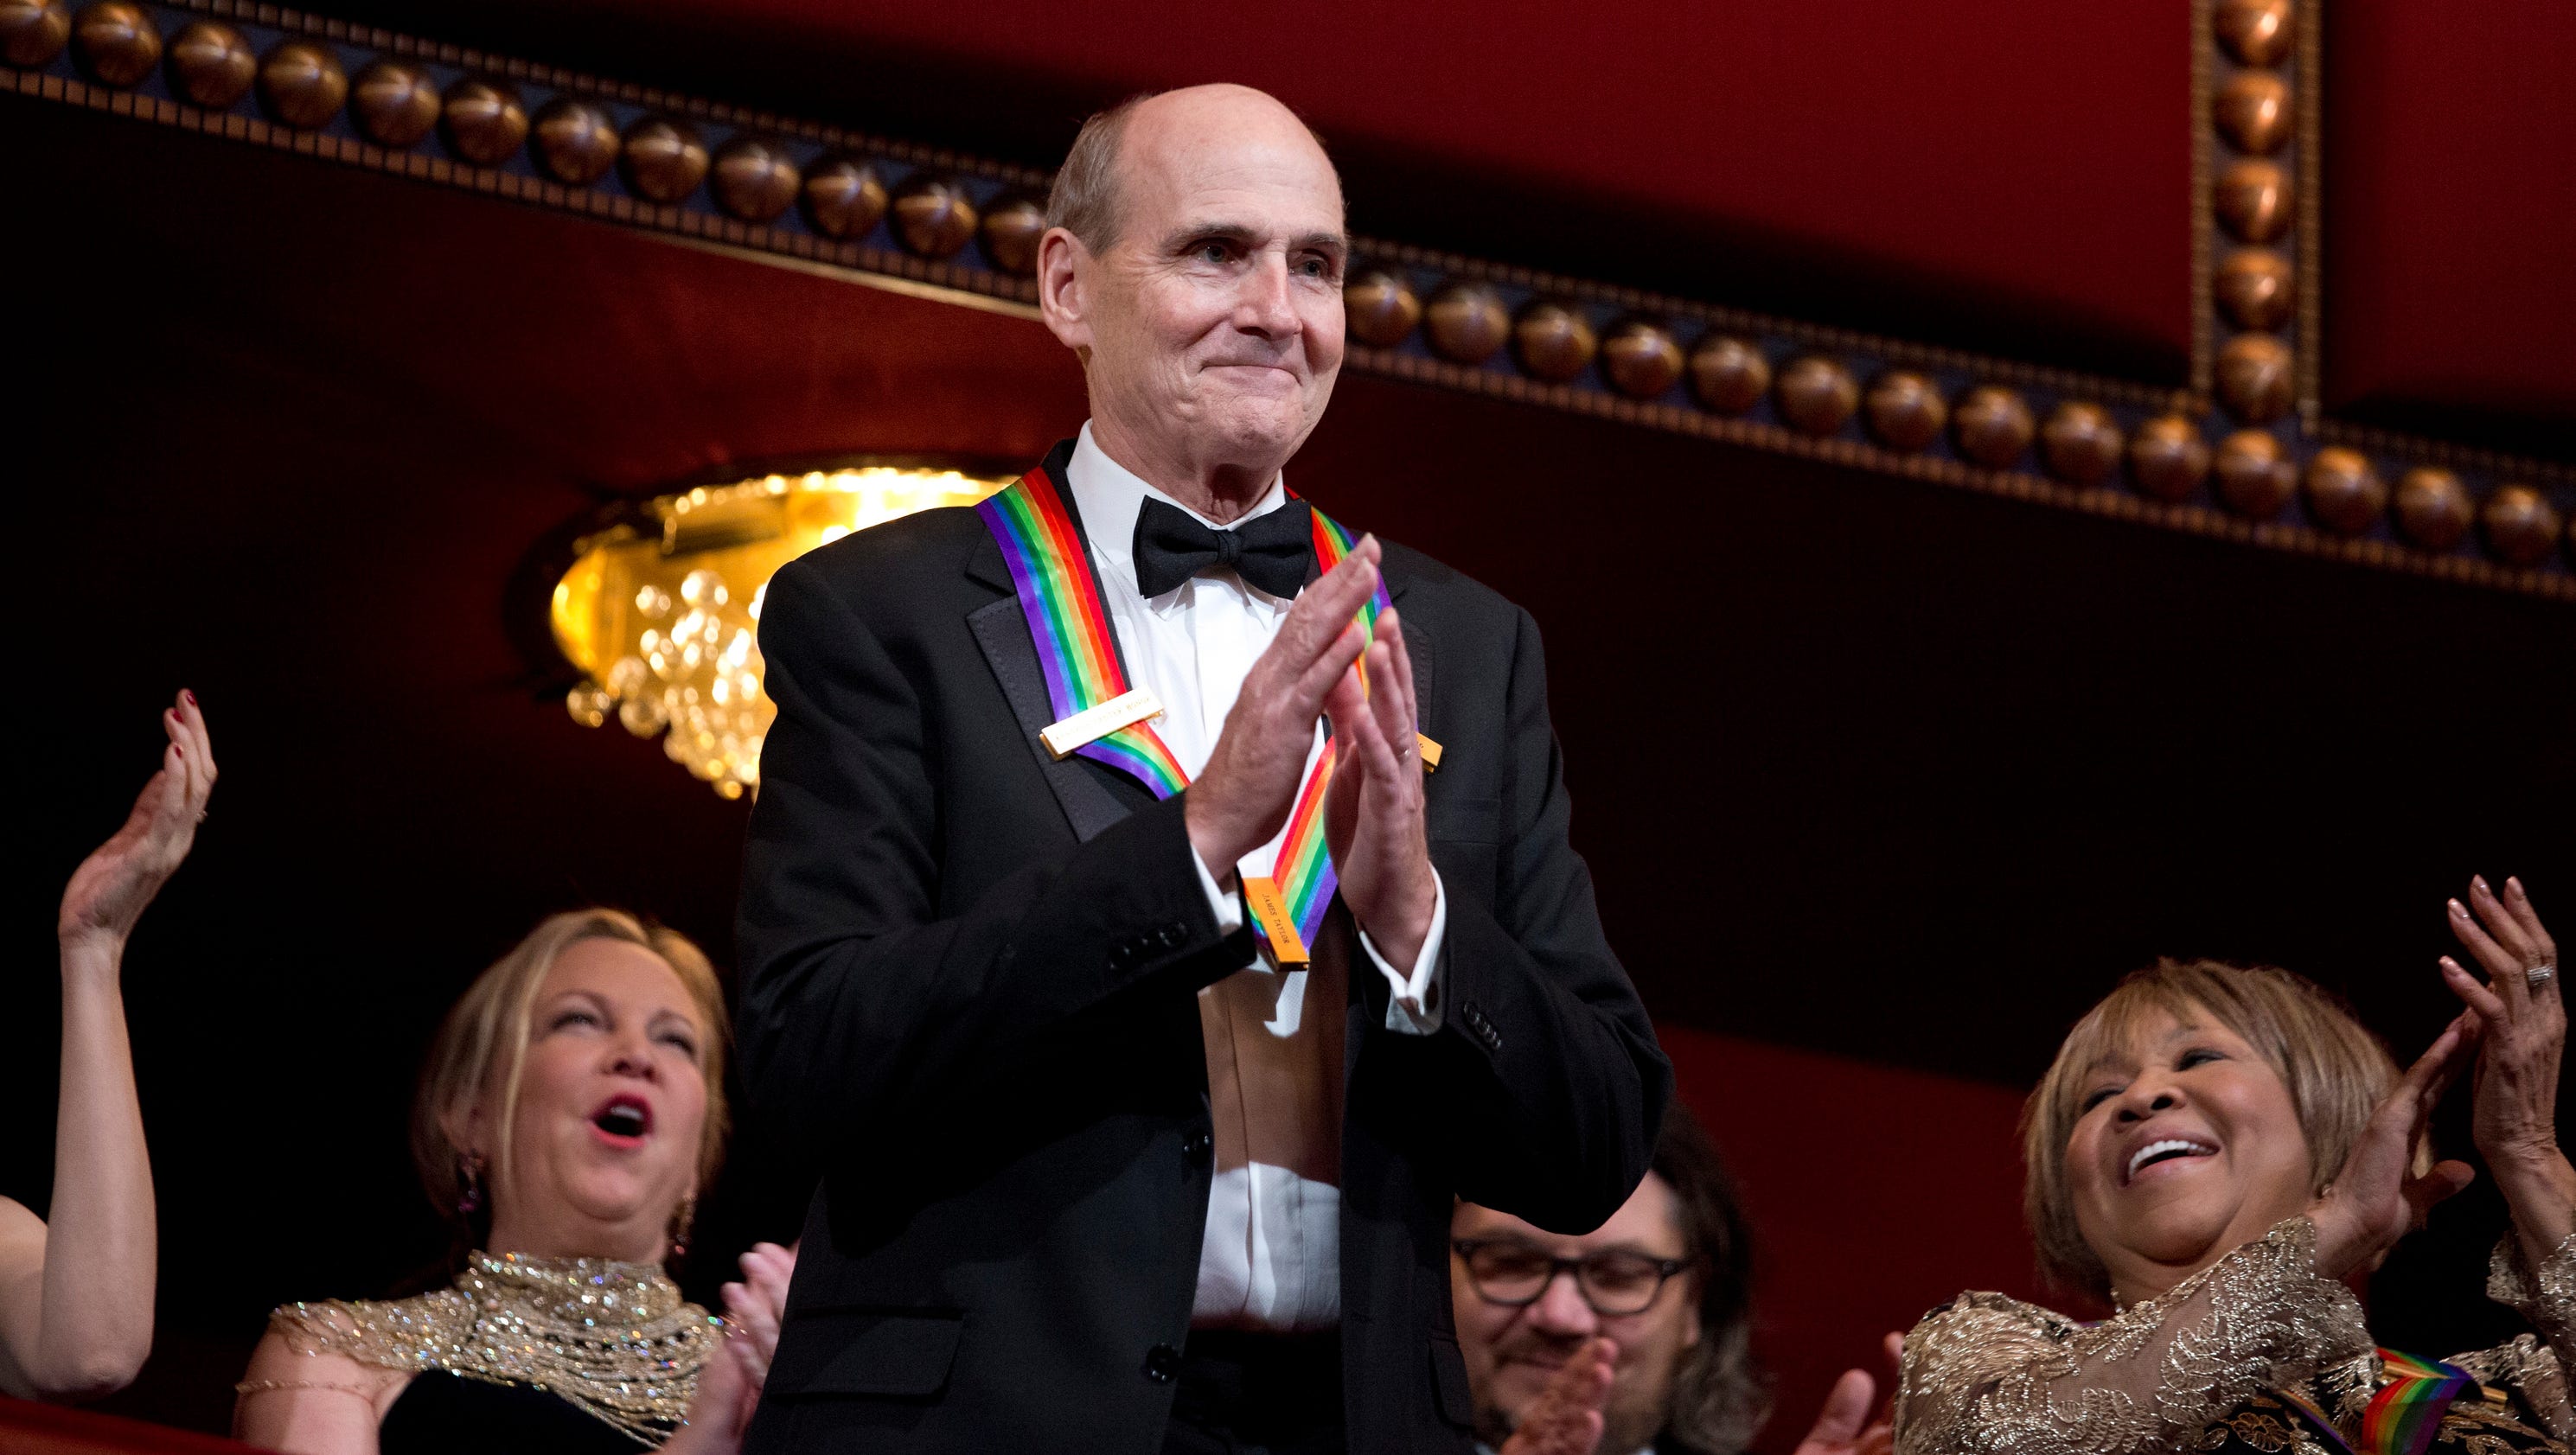 Nielsens: 'Kennedy Center Honors' up, 'New Year's Rockin' Eve' down